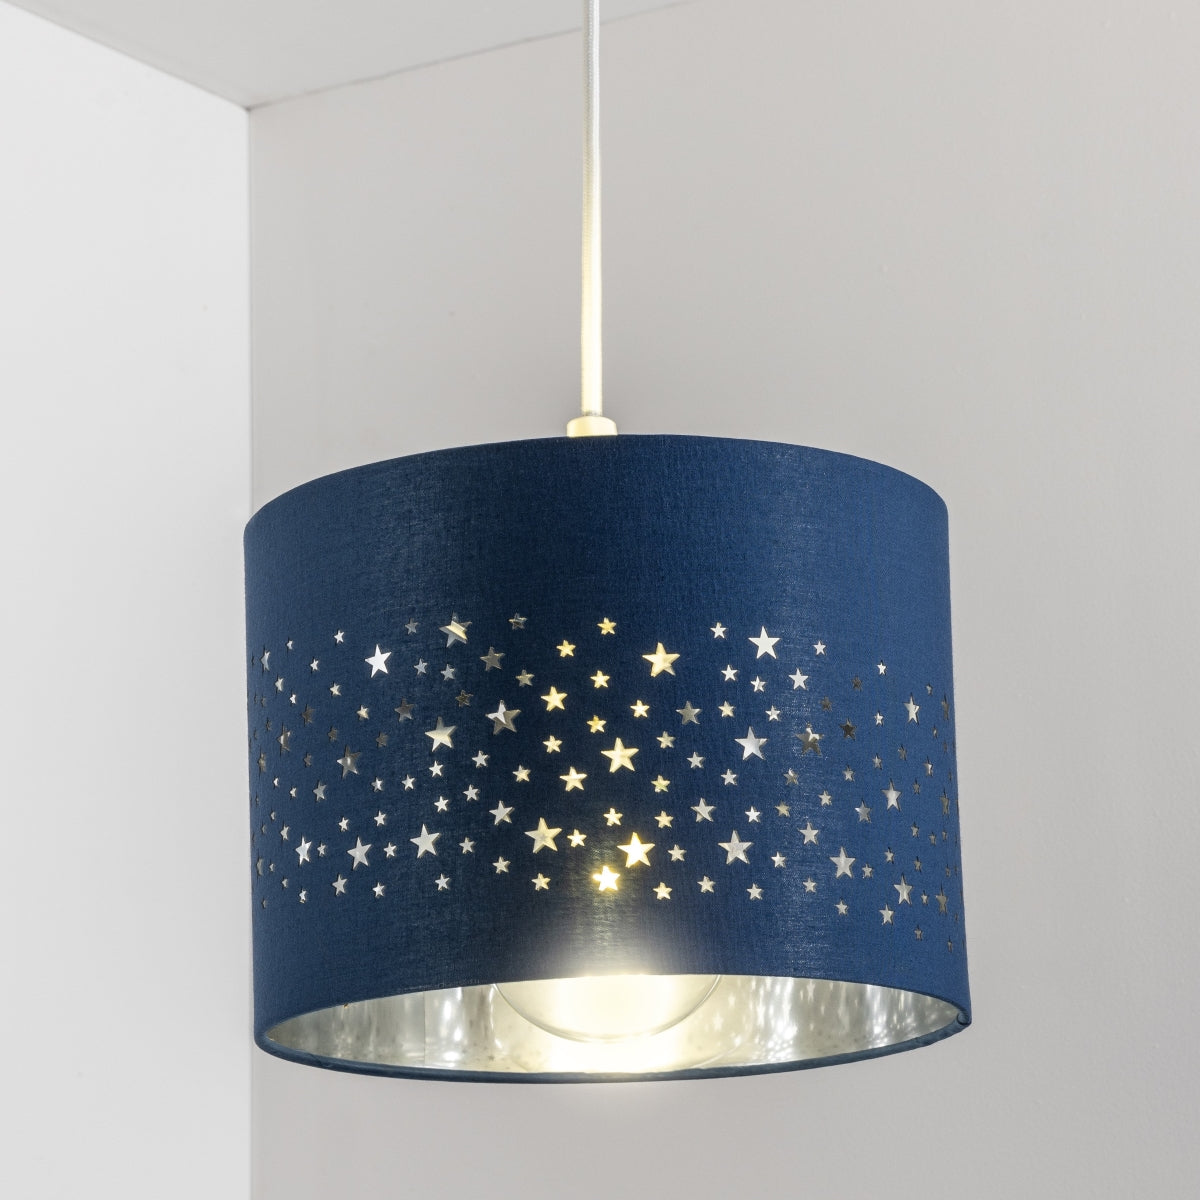 CGC STARDUST Navy Blue Star Easy Fit Lamp Shade